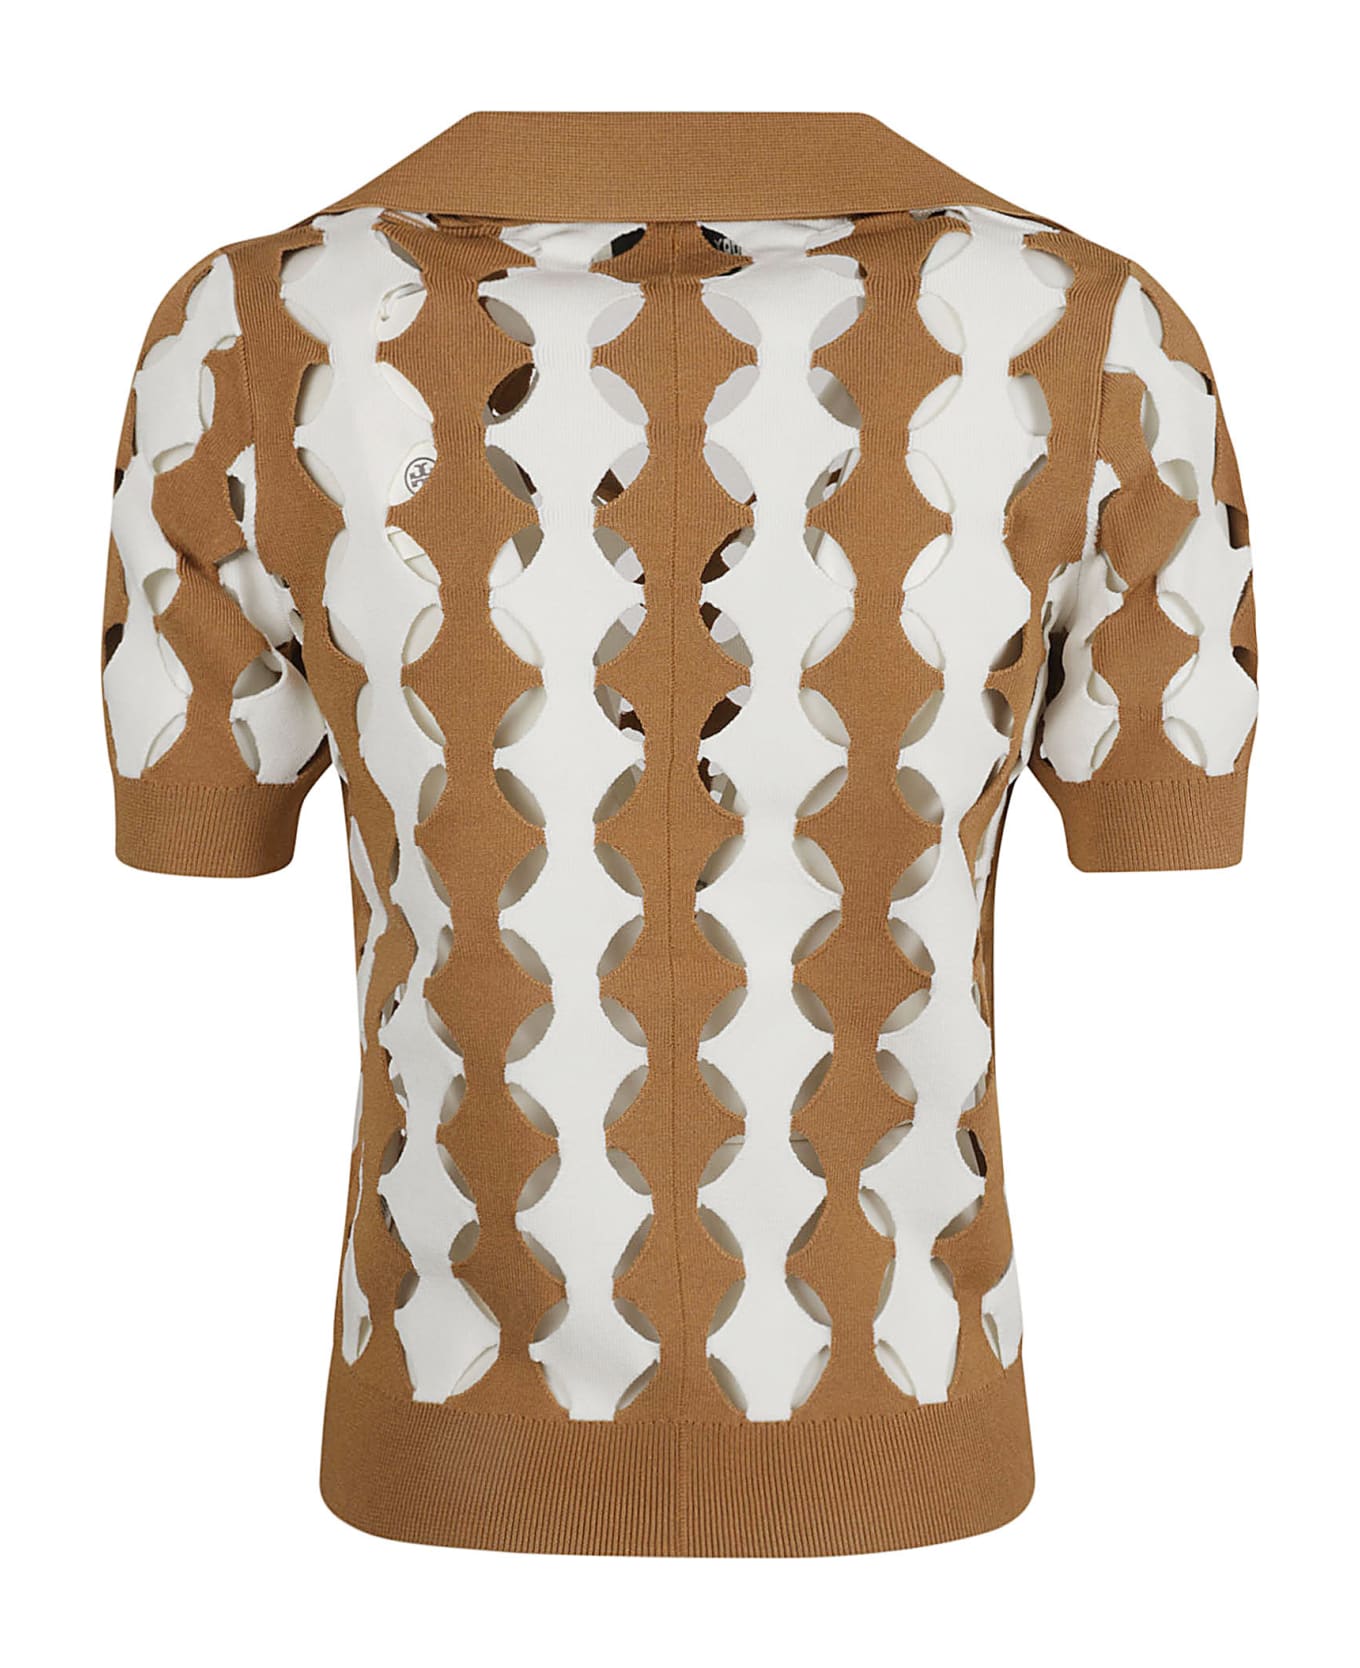 Tory Burch Cut-out Polo Shirt - Golden Maple/Soft White